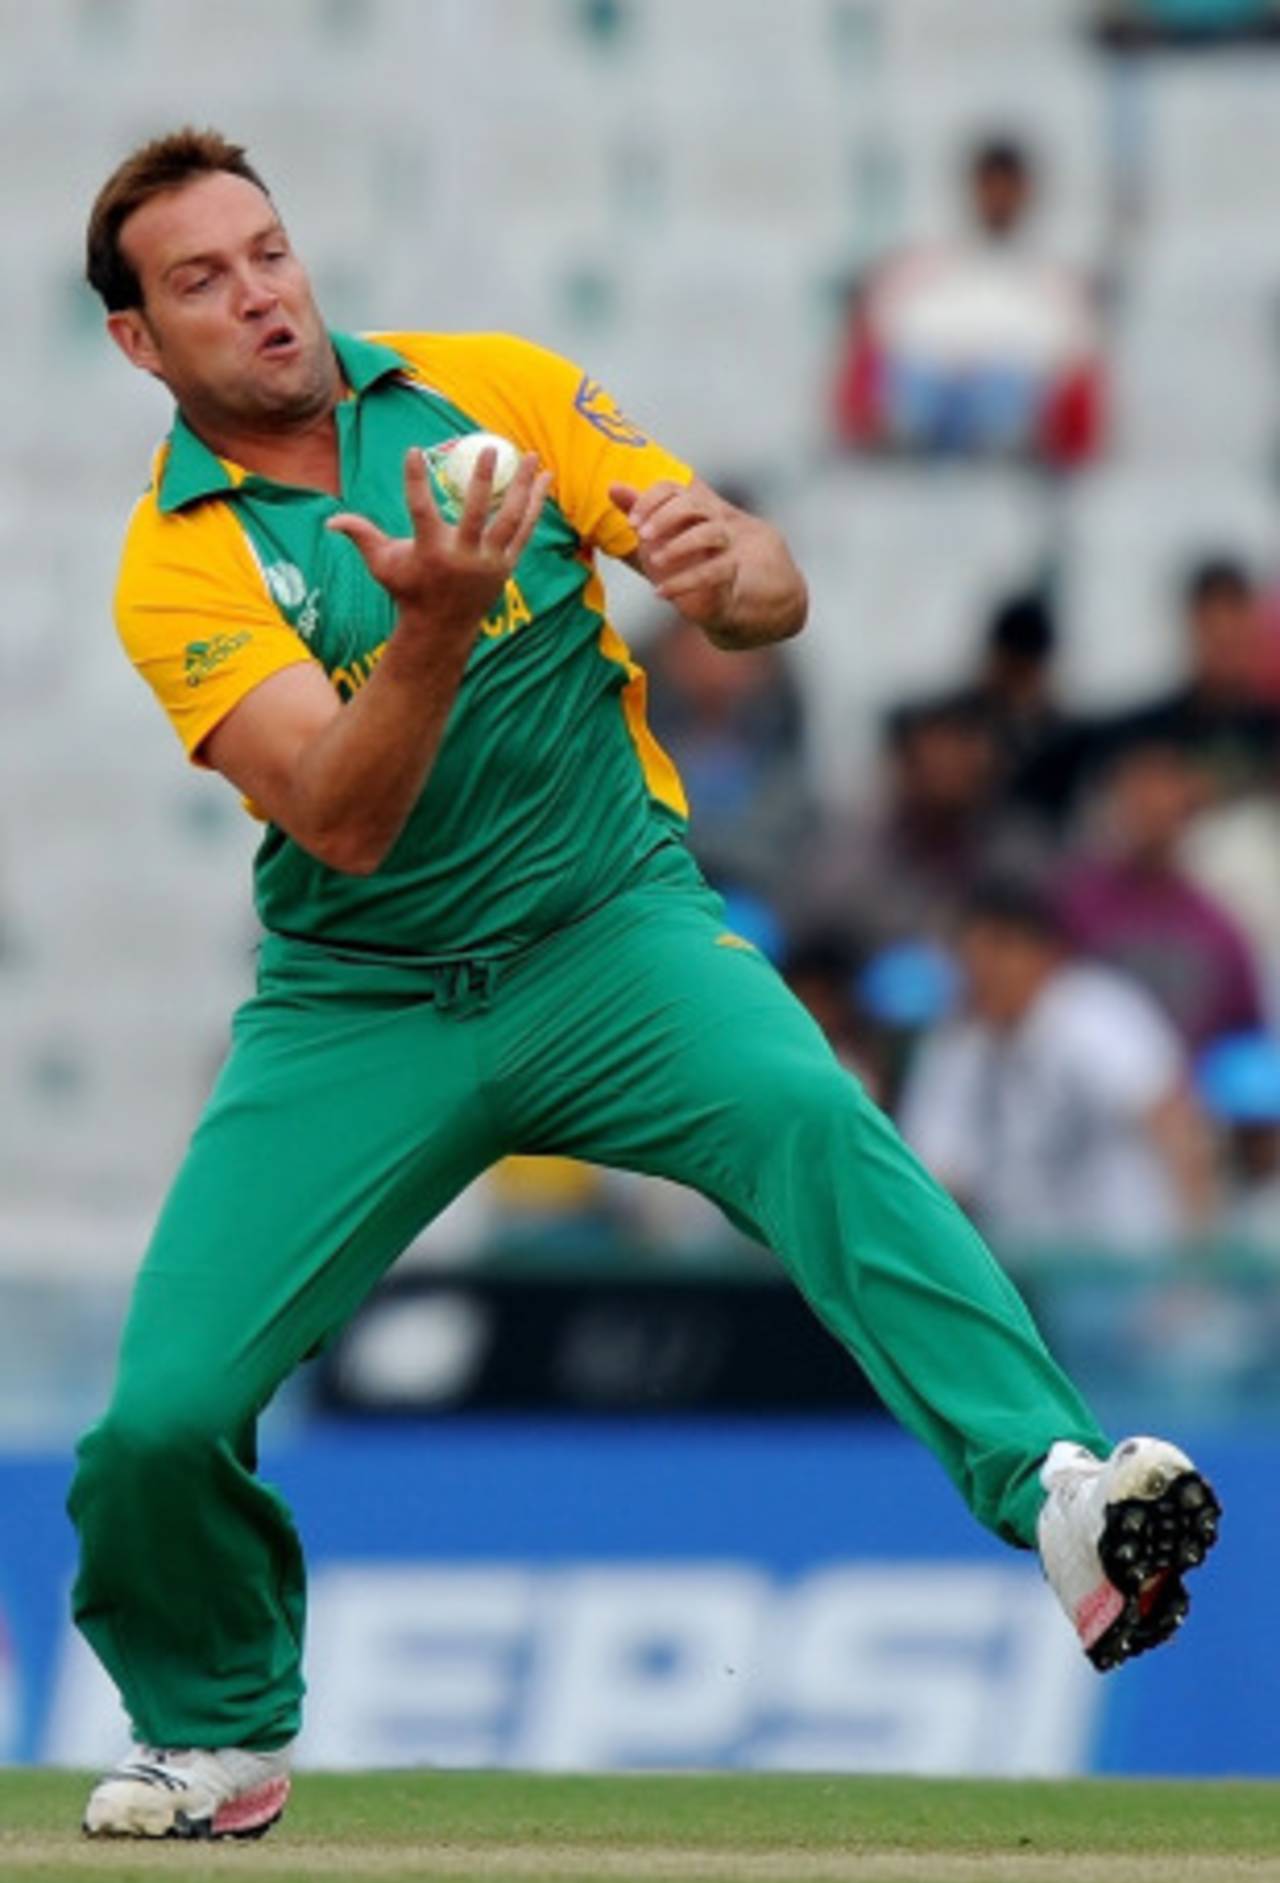 Jacques Kallis takes a return catch to dismiss Alexei Kervezee, Netherlands v South Africa, World Cup 2011, Mohali, March 3, 2011